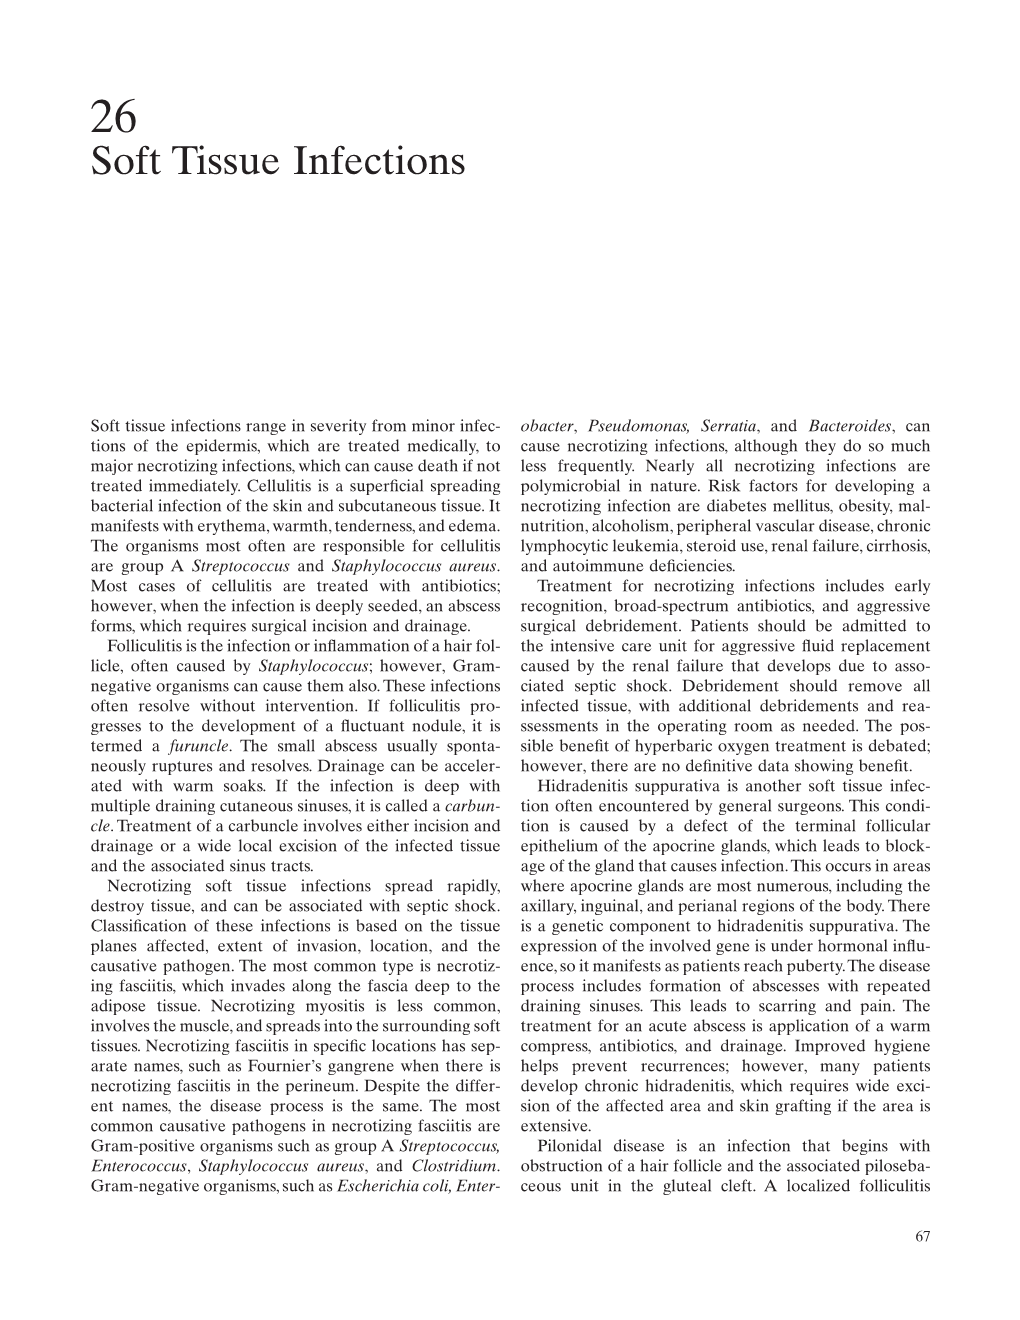 Soft Tissue Infections